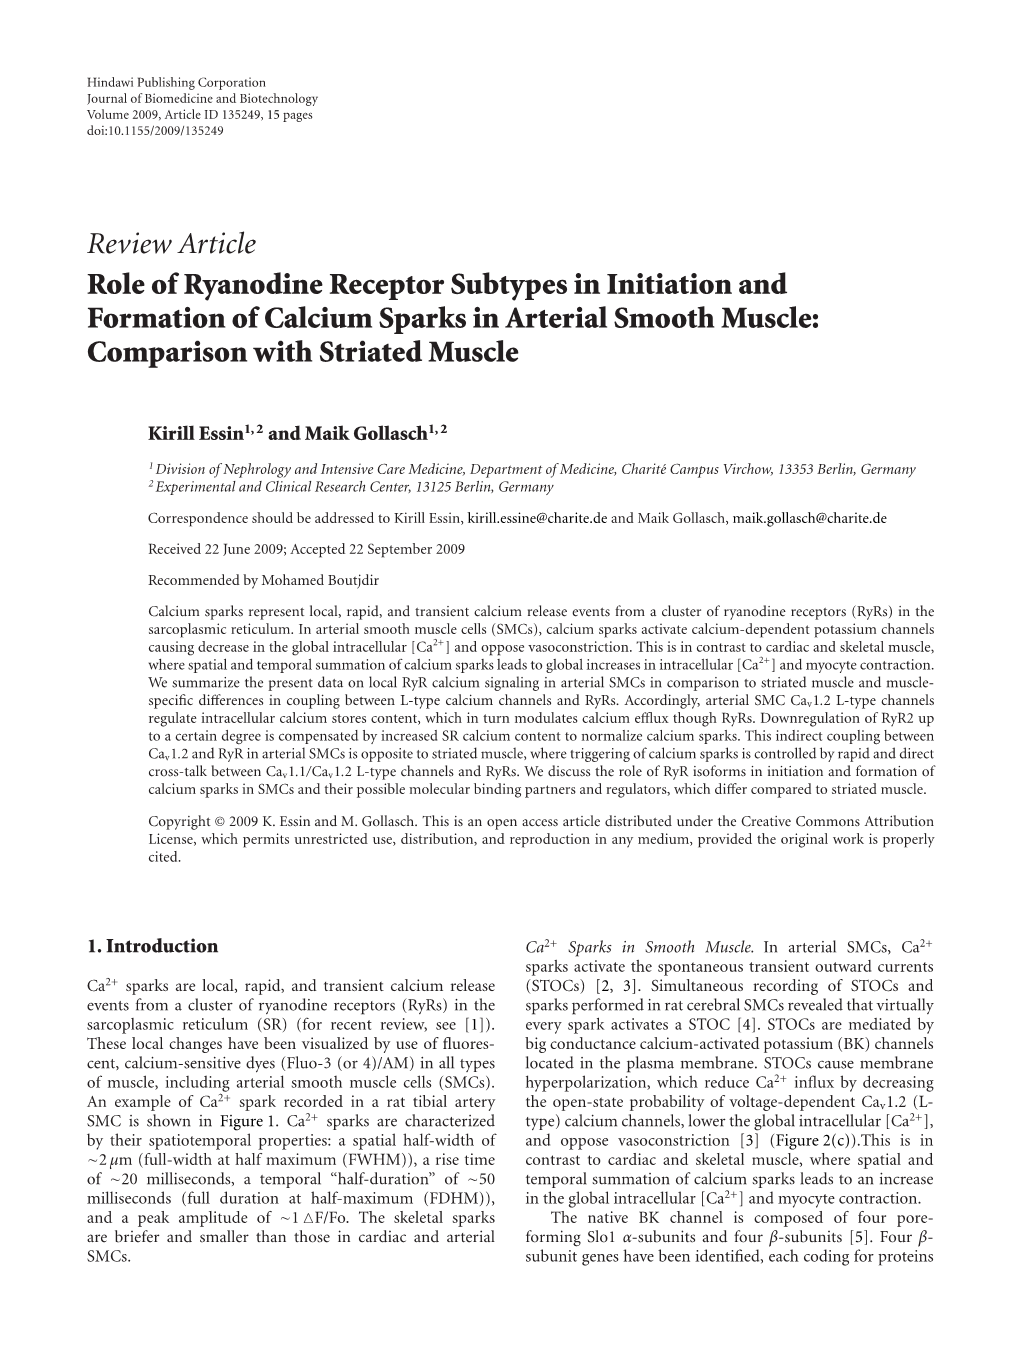 Review Article Role of Ryanodine Receptor Subtypes in Initiation and Formation of Calcium Sparks in Arterial Smooth Muscle: Comparison with Striated Muscle